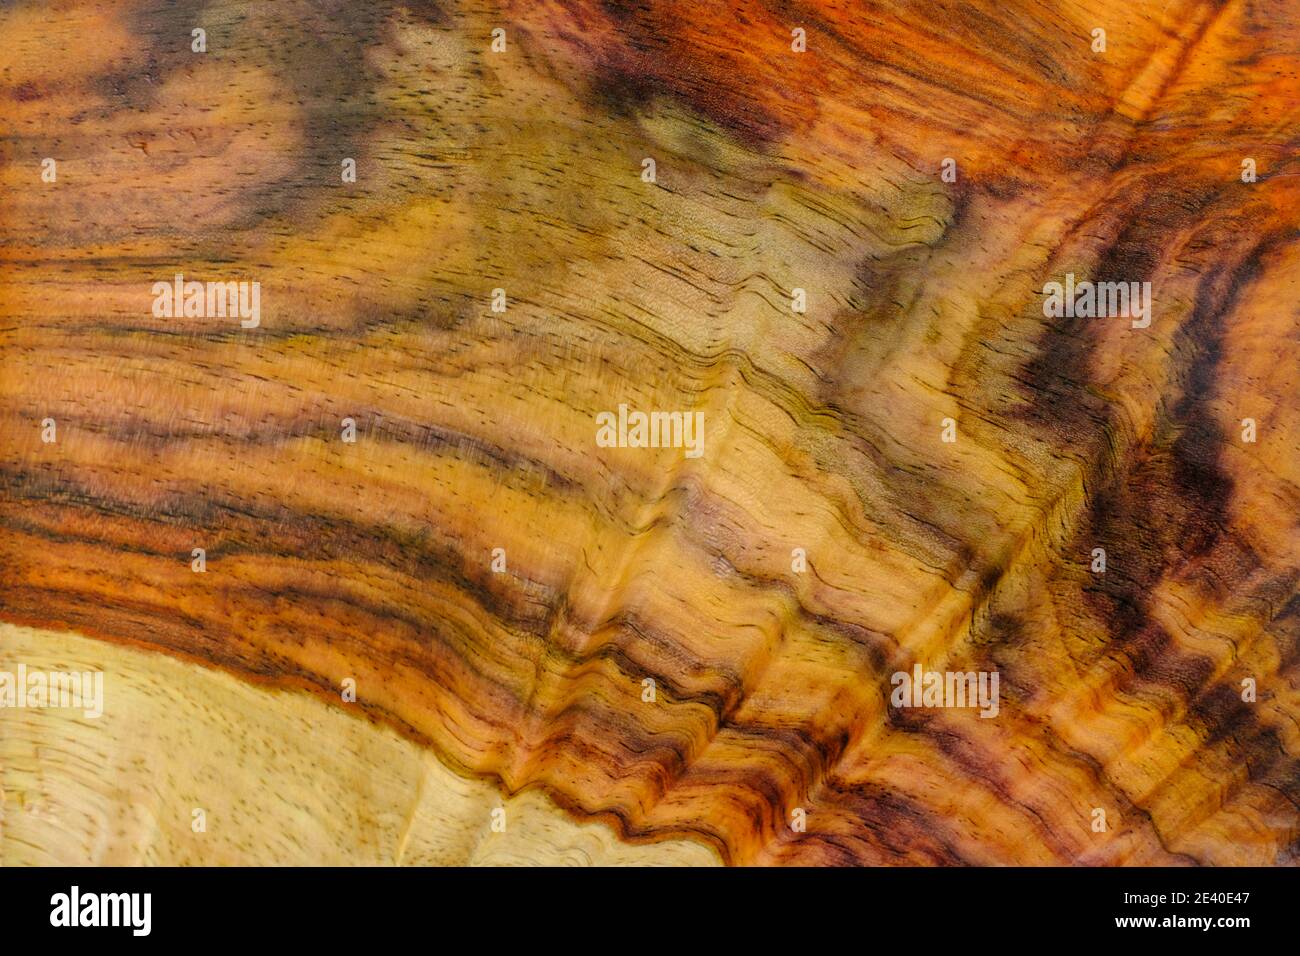 Rosewood wood texture background surface with natural pattern Stock Photo